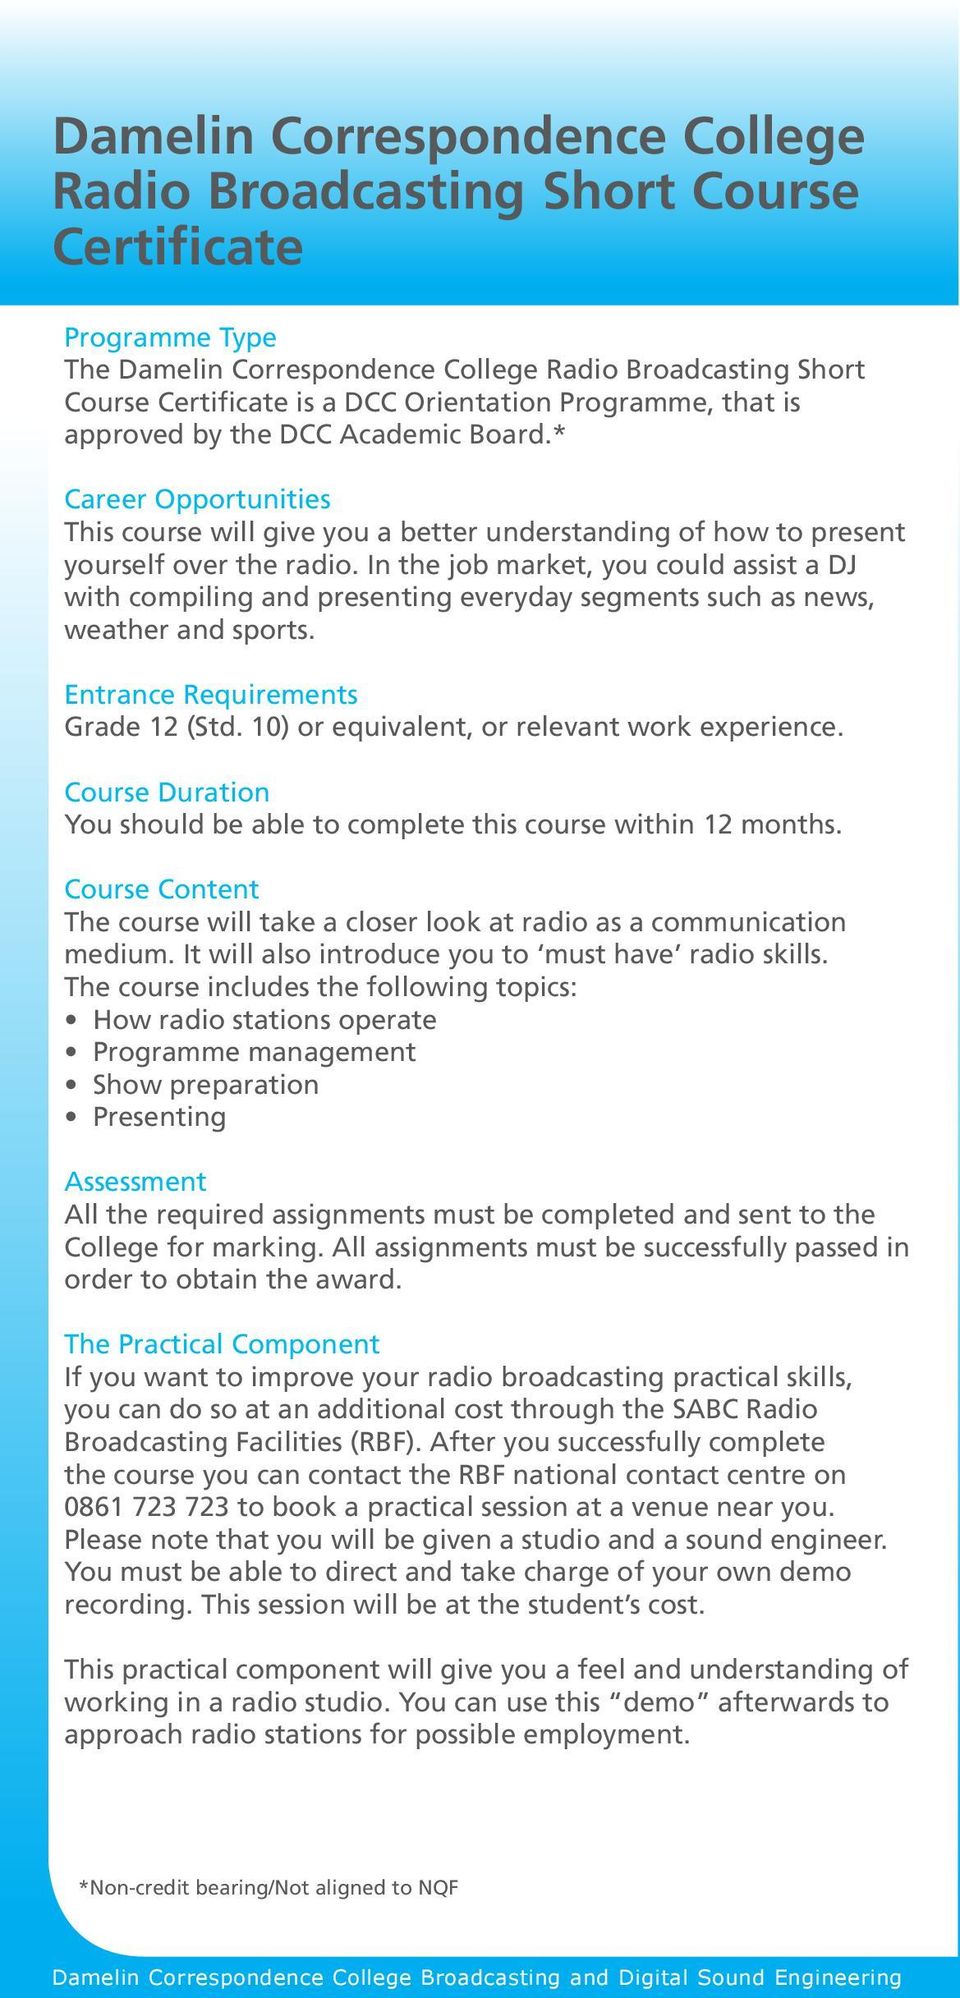 In the job market, you could assist a DJ with compiling and presenting everyday segments such as news, weather and sports. Entrance Requirements Grade 12 (Std.